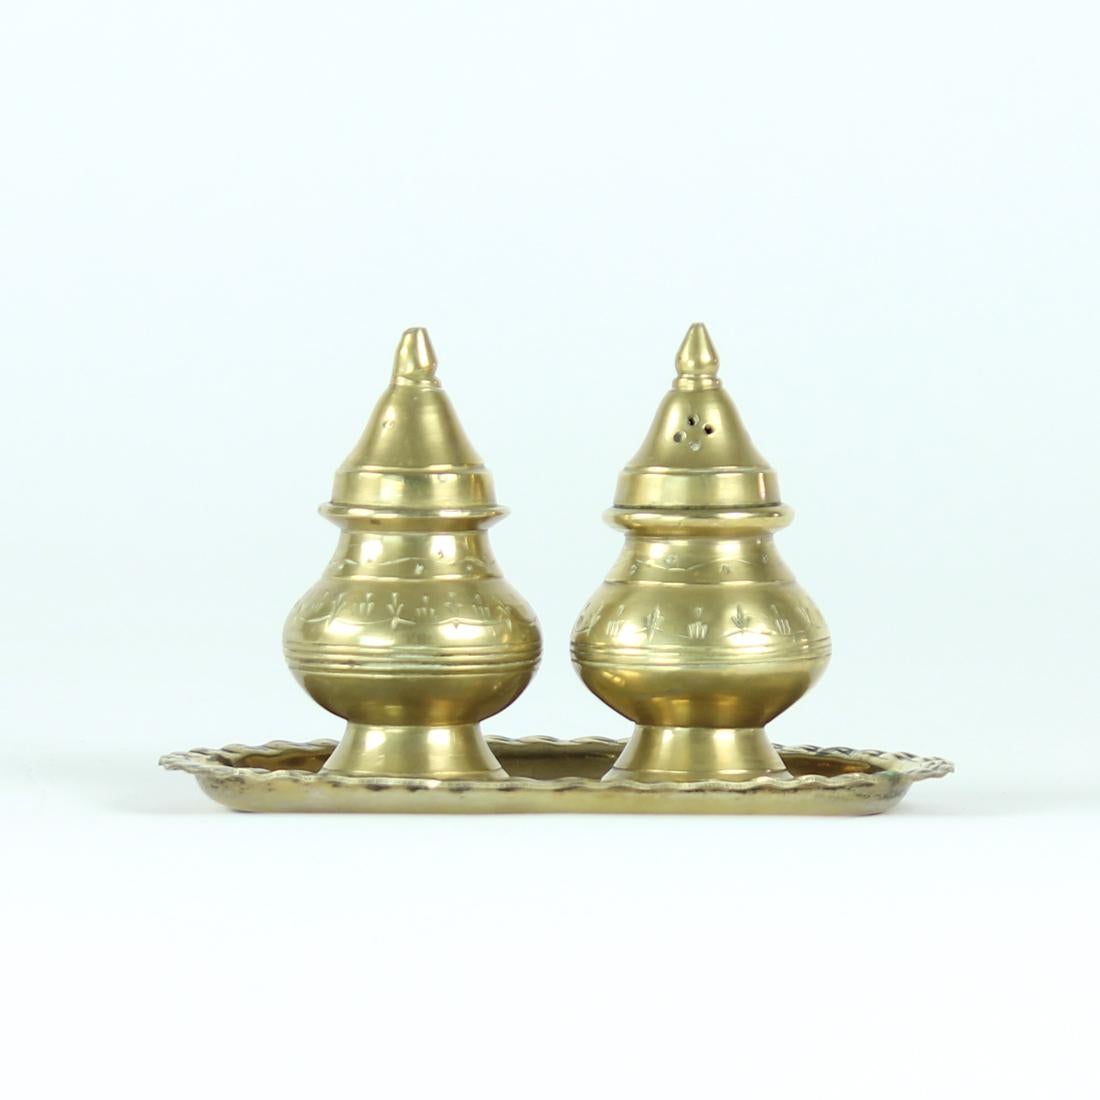 Beautiful set of oriental looking vintage salt and pepper shaker. Produced out of brass with oriental looking ornaments on each piece. The set stands on an original brass plate to finish the picture. Beautiful set in original, beautiful condition